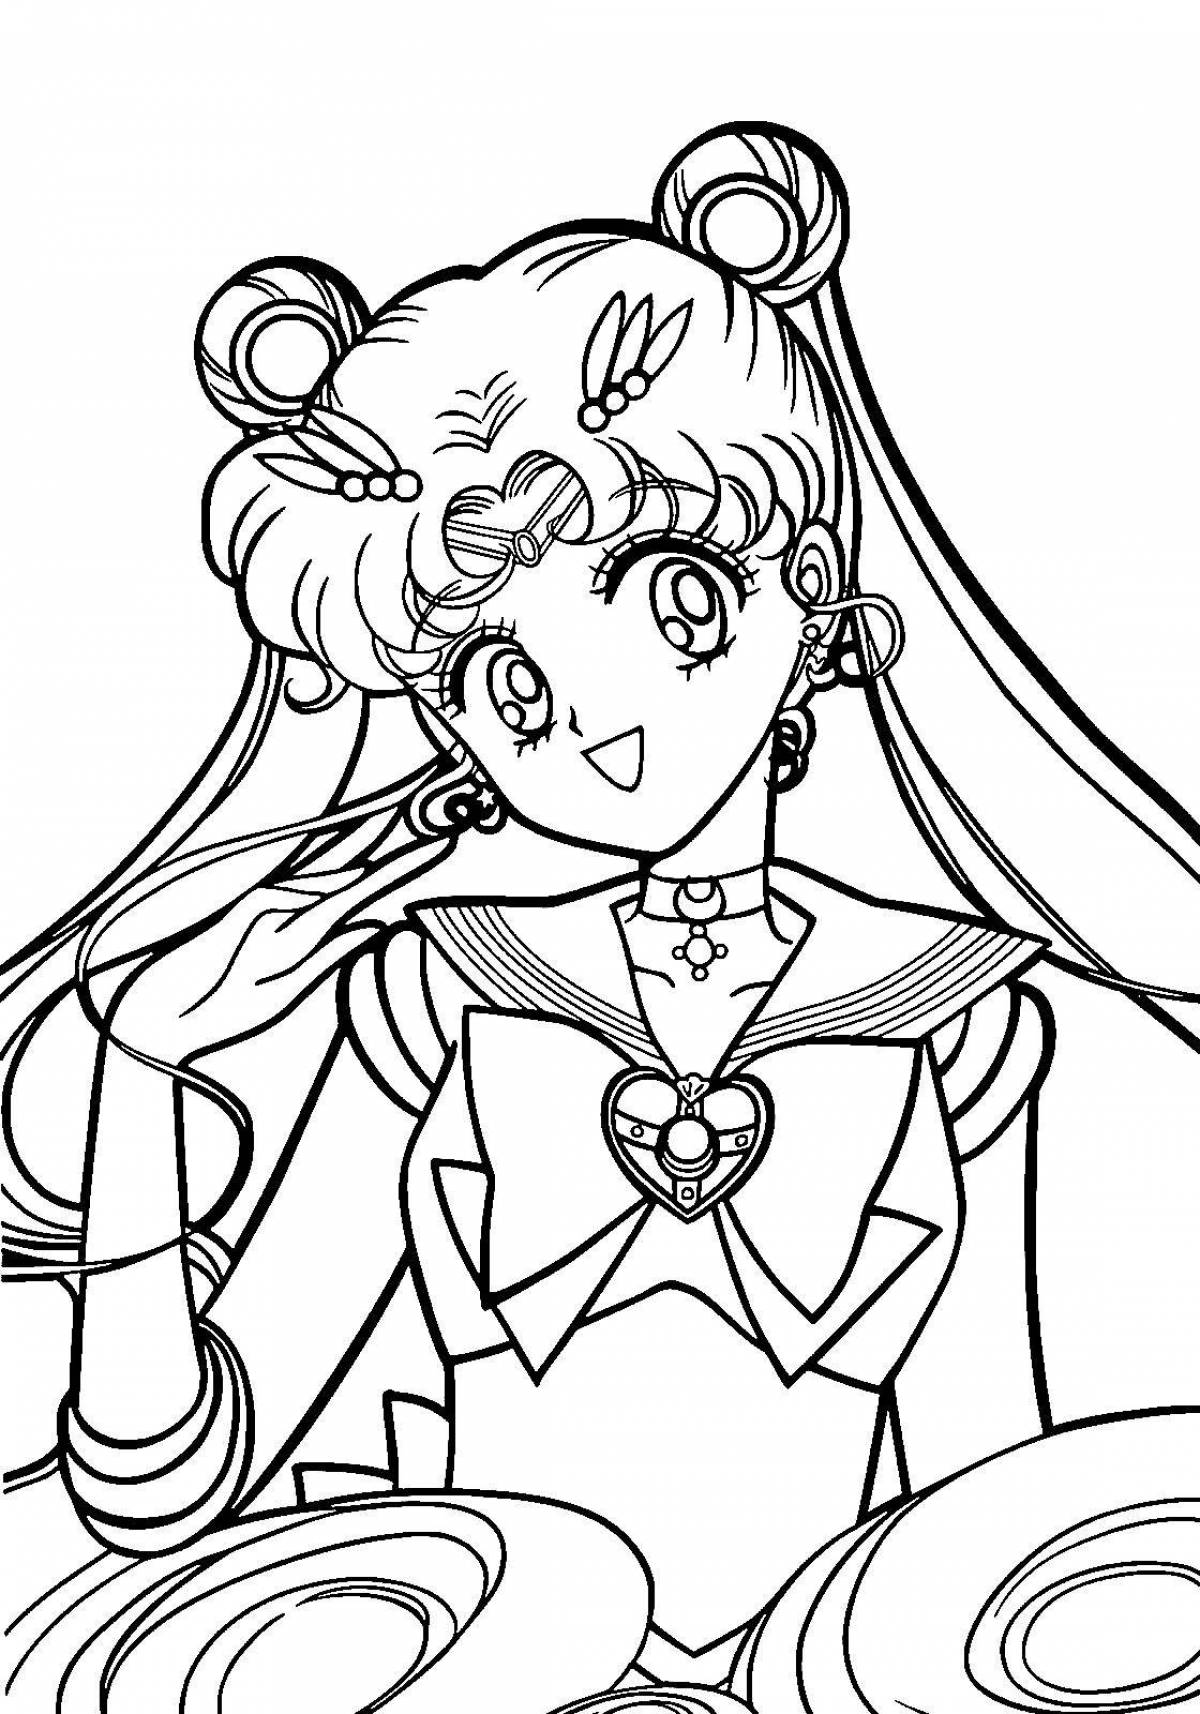 Tempting coloring of sailor moon